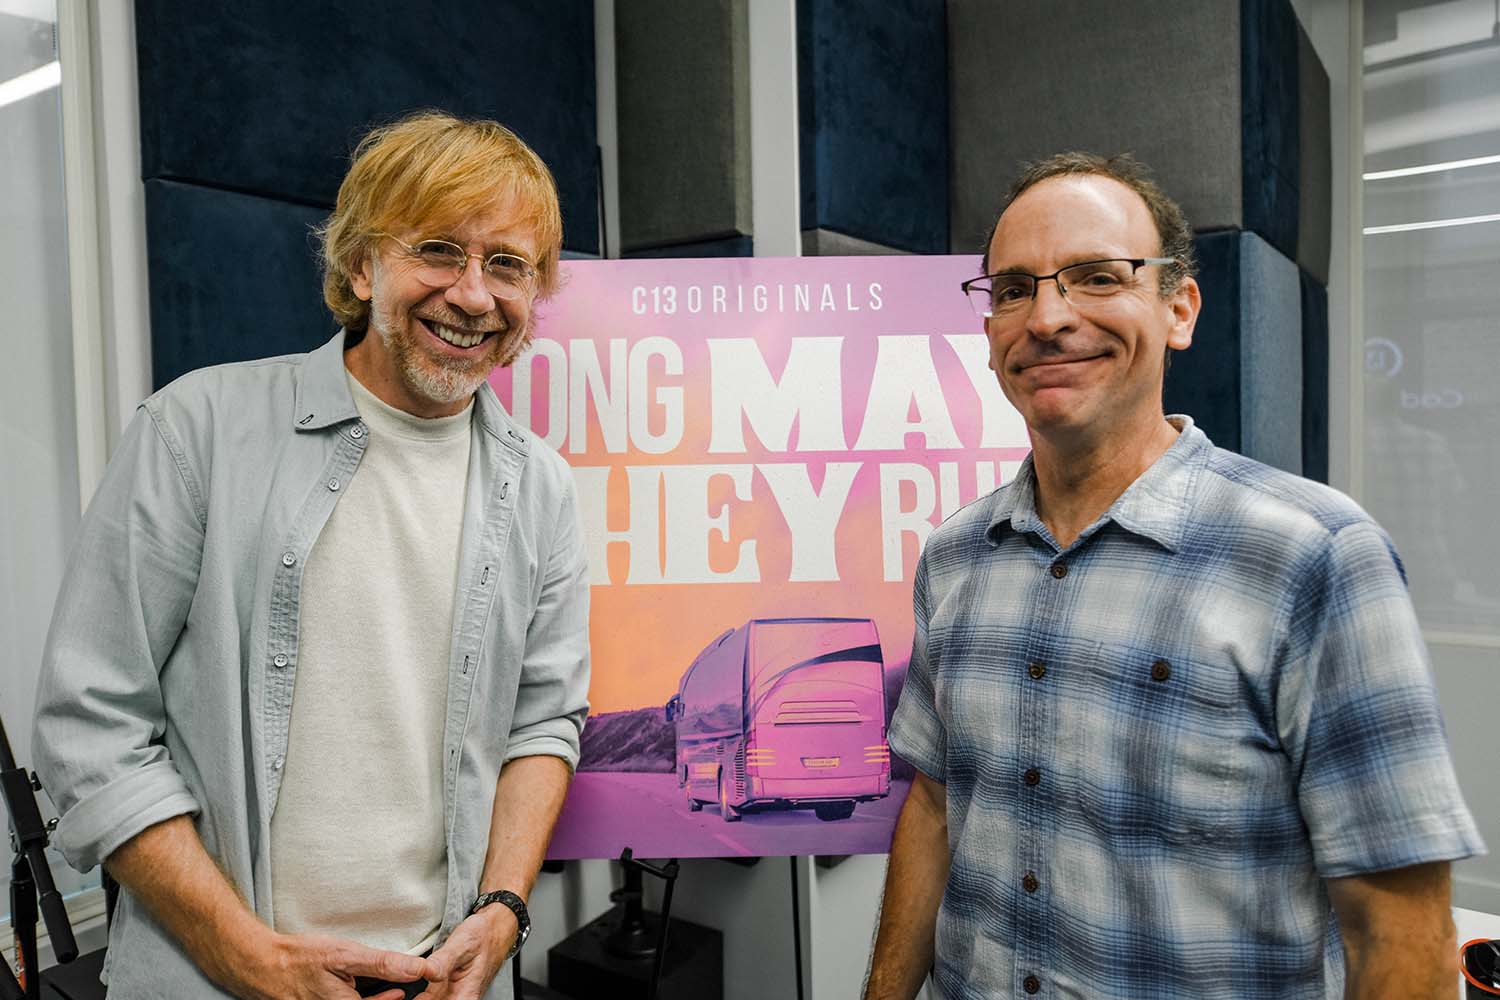 Debut Season of ‘Long May They Run’ Podcast to Focus on Phish History